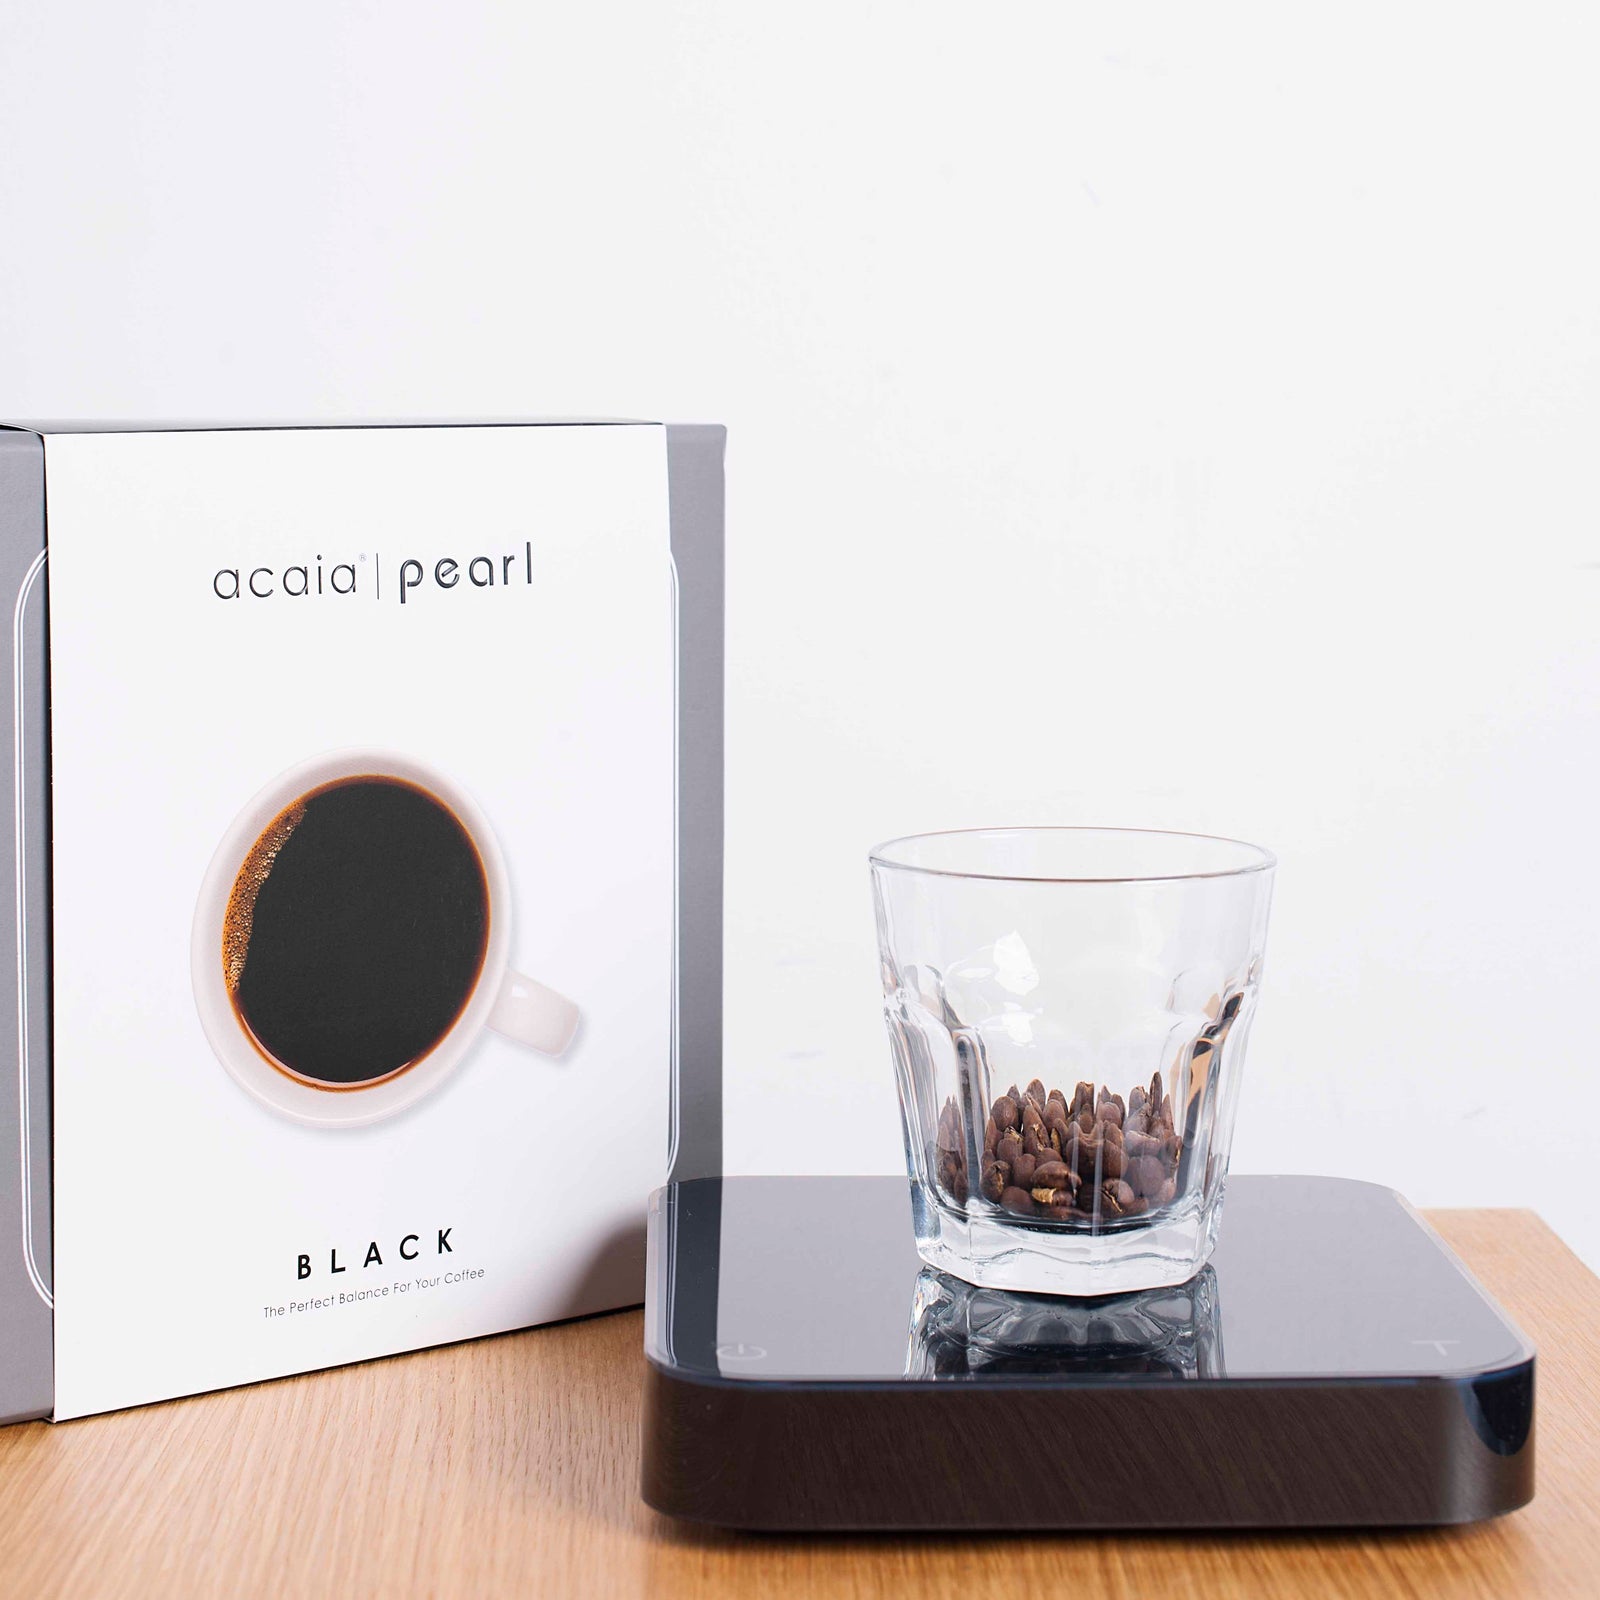 A Tandem Acaia Pearl Scale (Black) with a reflective black surface and a simple display, set against a pale yellow background. The scale shows a reading of zero and is USB rechargeable.